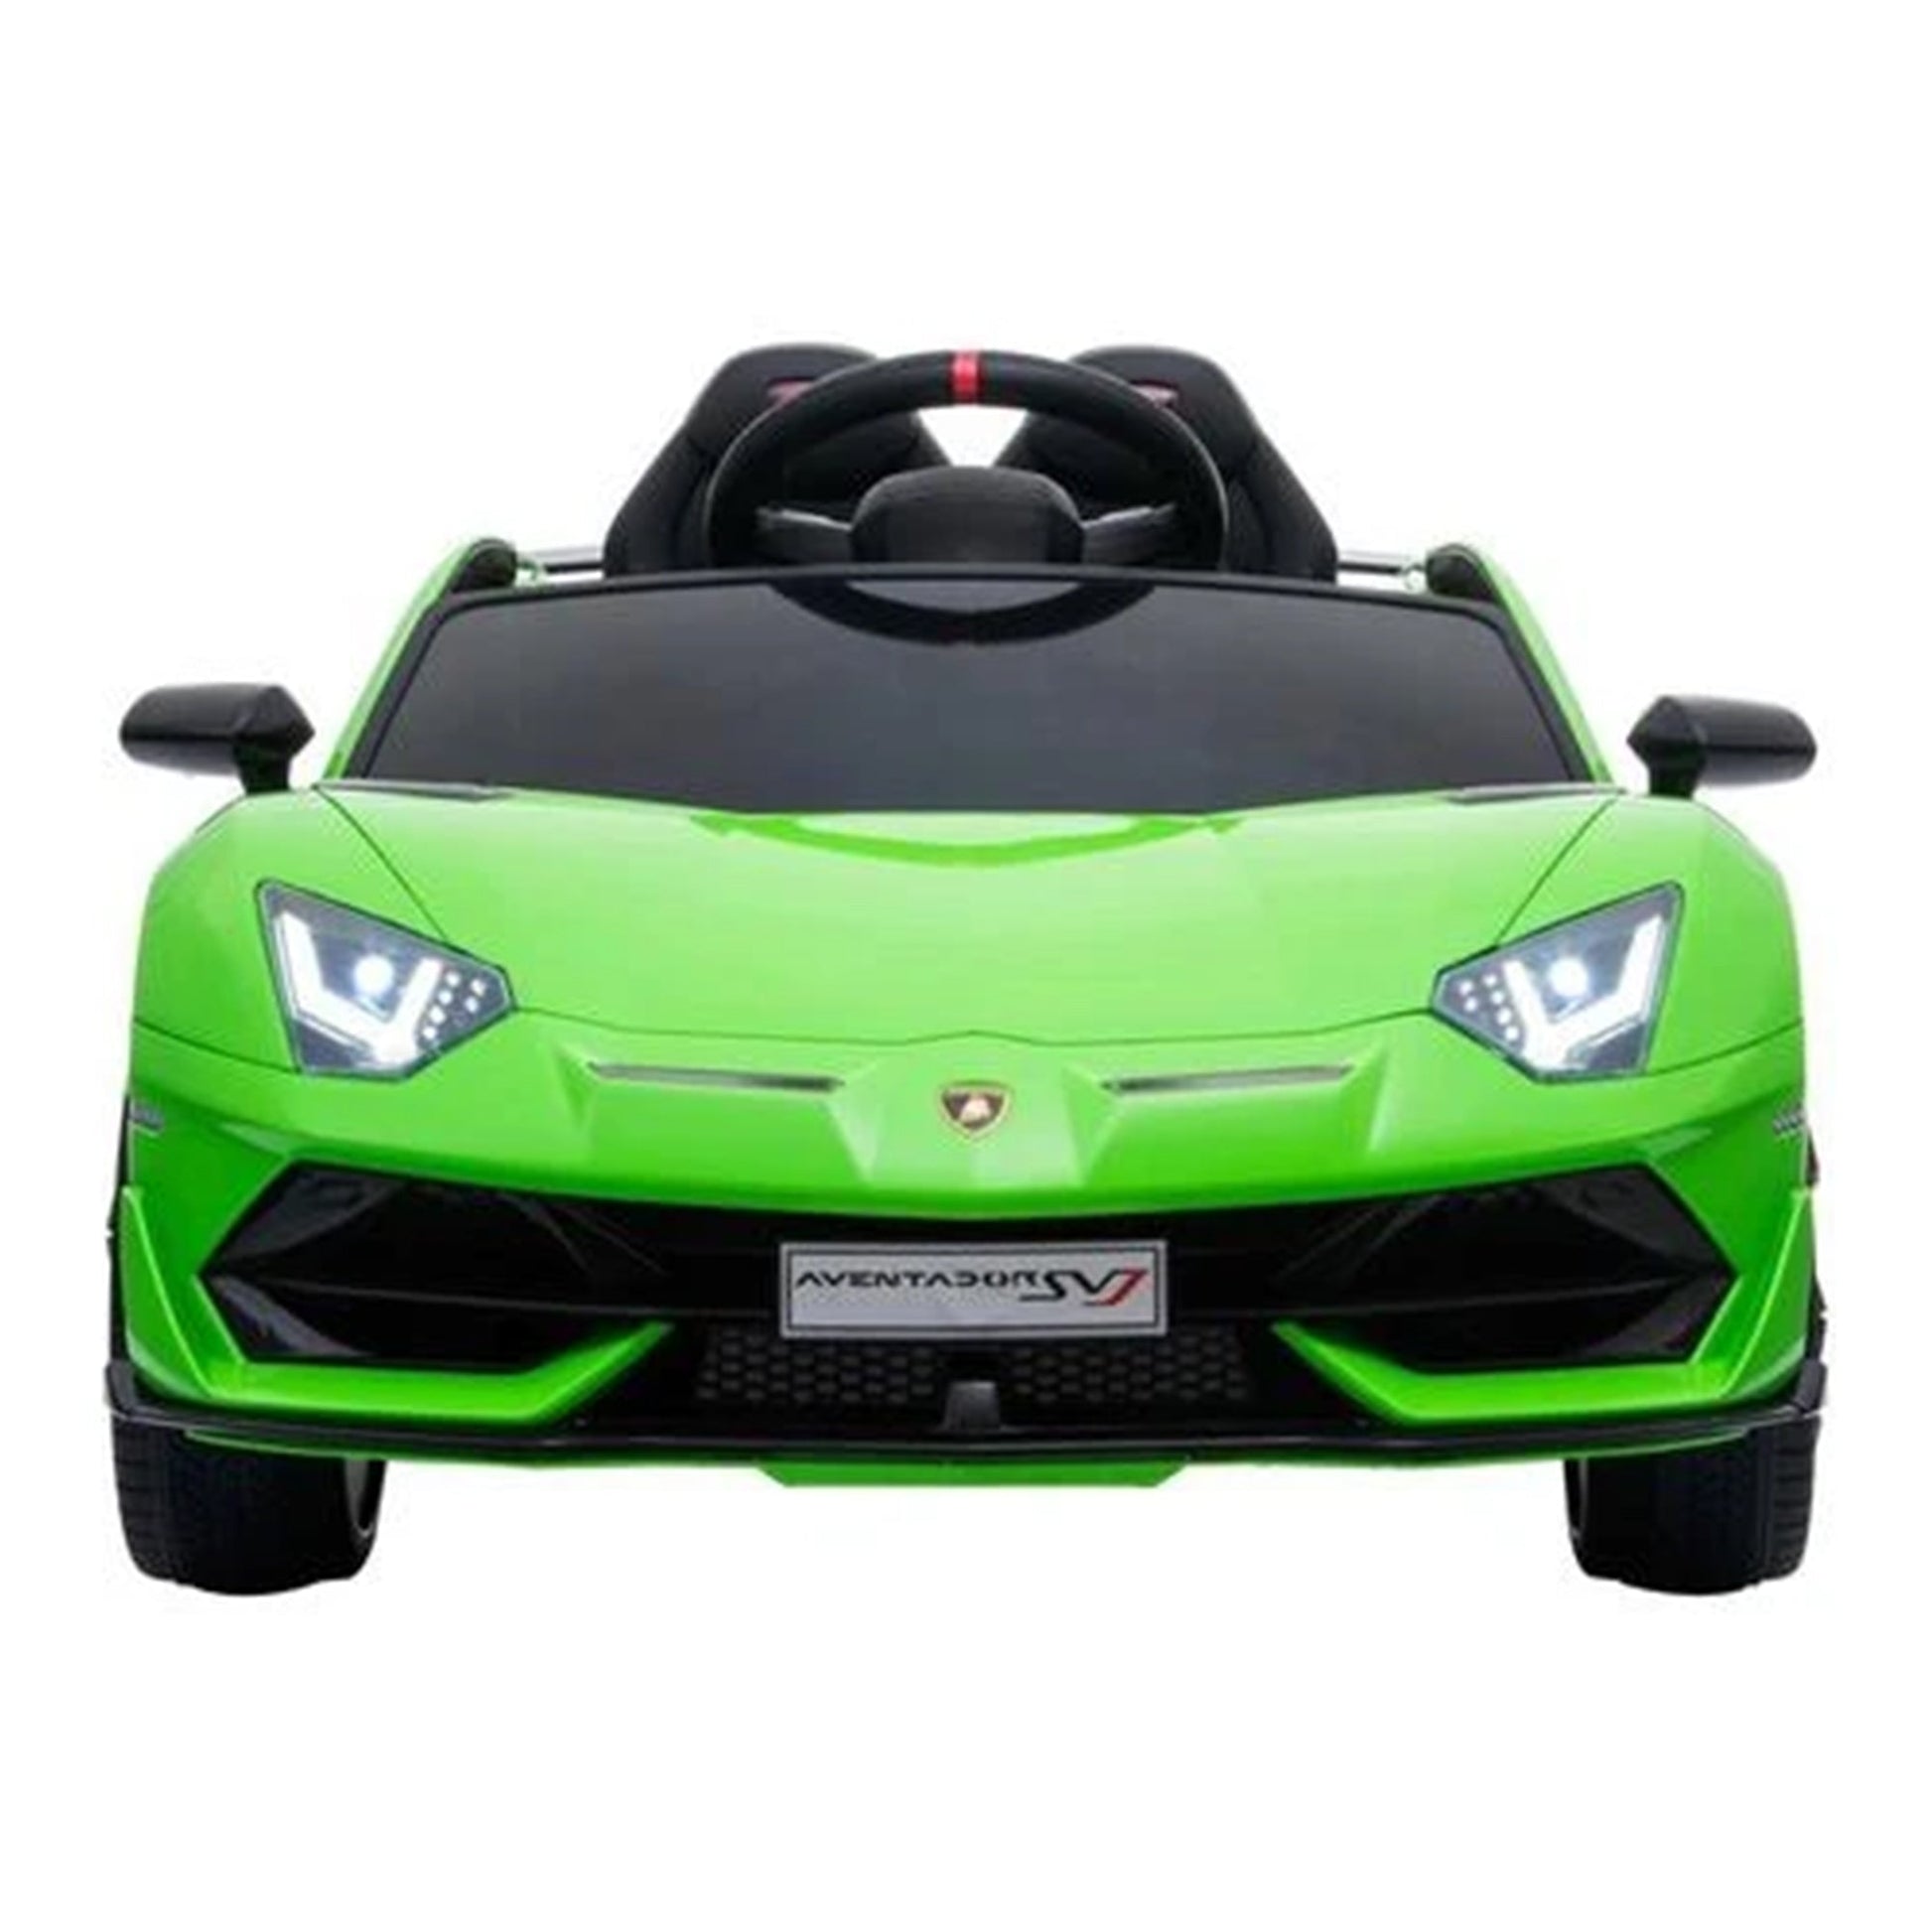 Green Lamborghini SVJ kids ride on car with parental remote control available at Kids Car store.